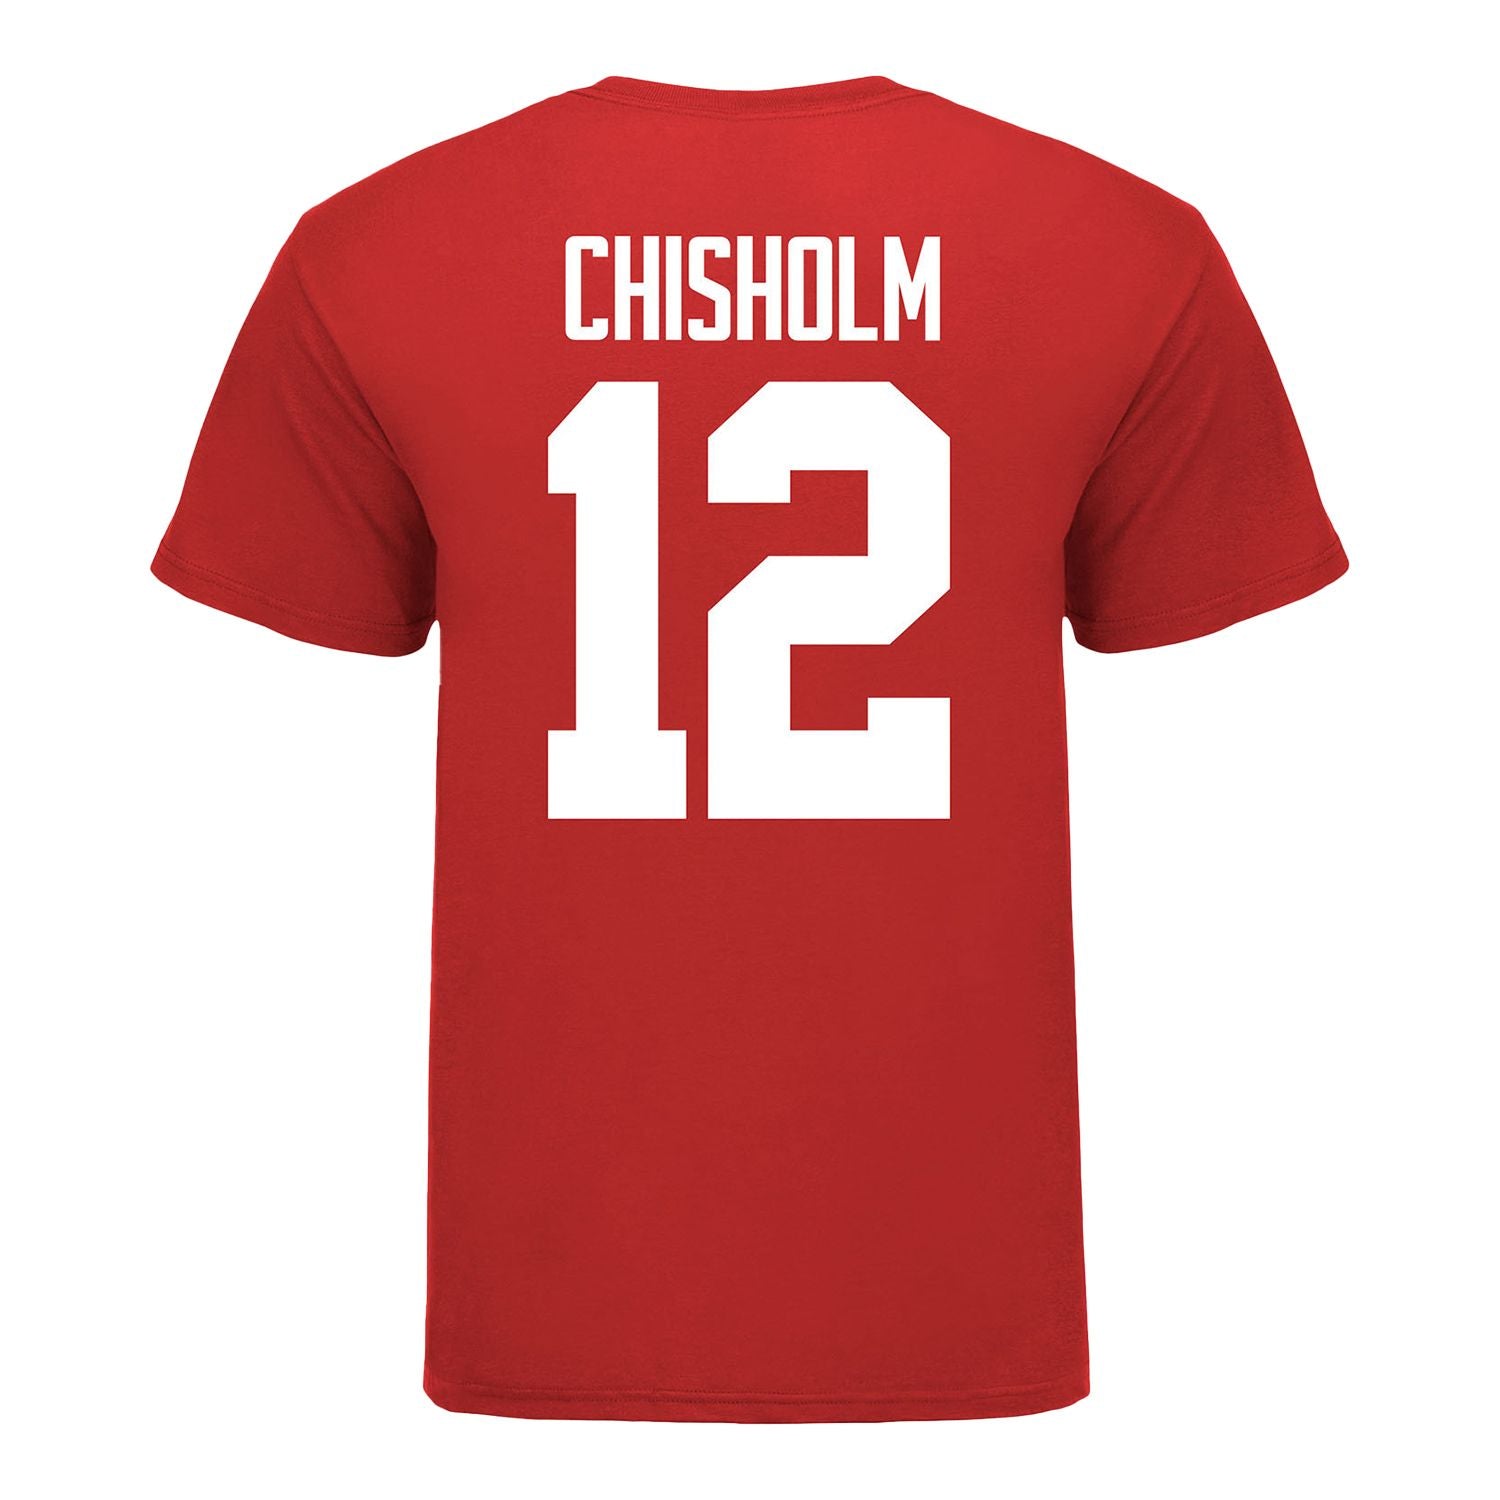 The Team Shop Ohio State Buckeyes Women's Lacrosse Student Athlete #12 Katie Chisholm T-Shirt / Small